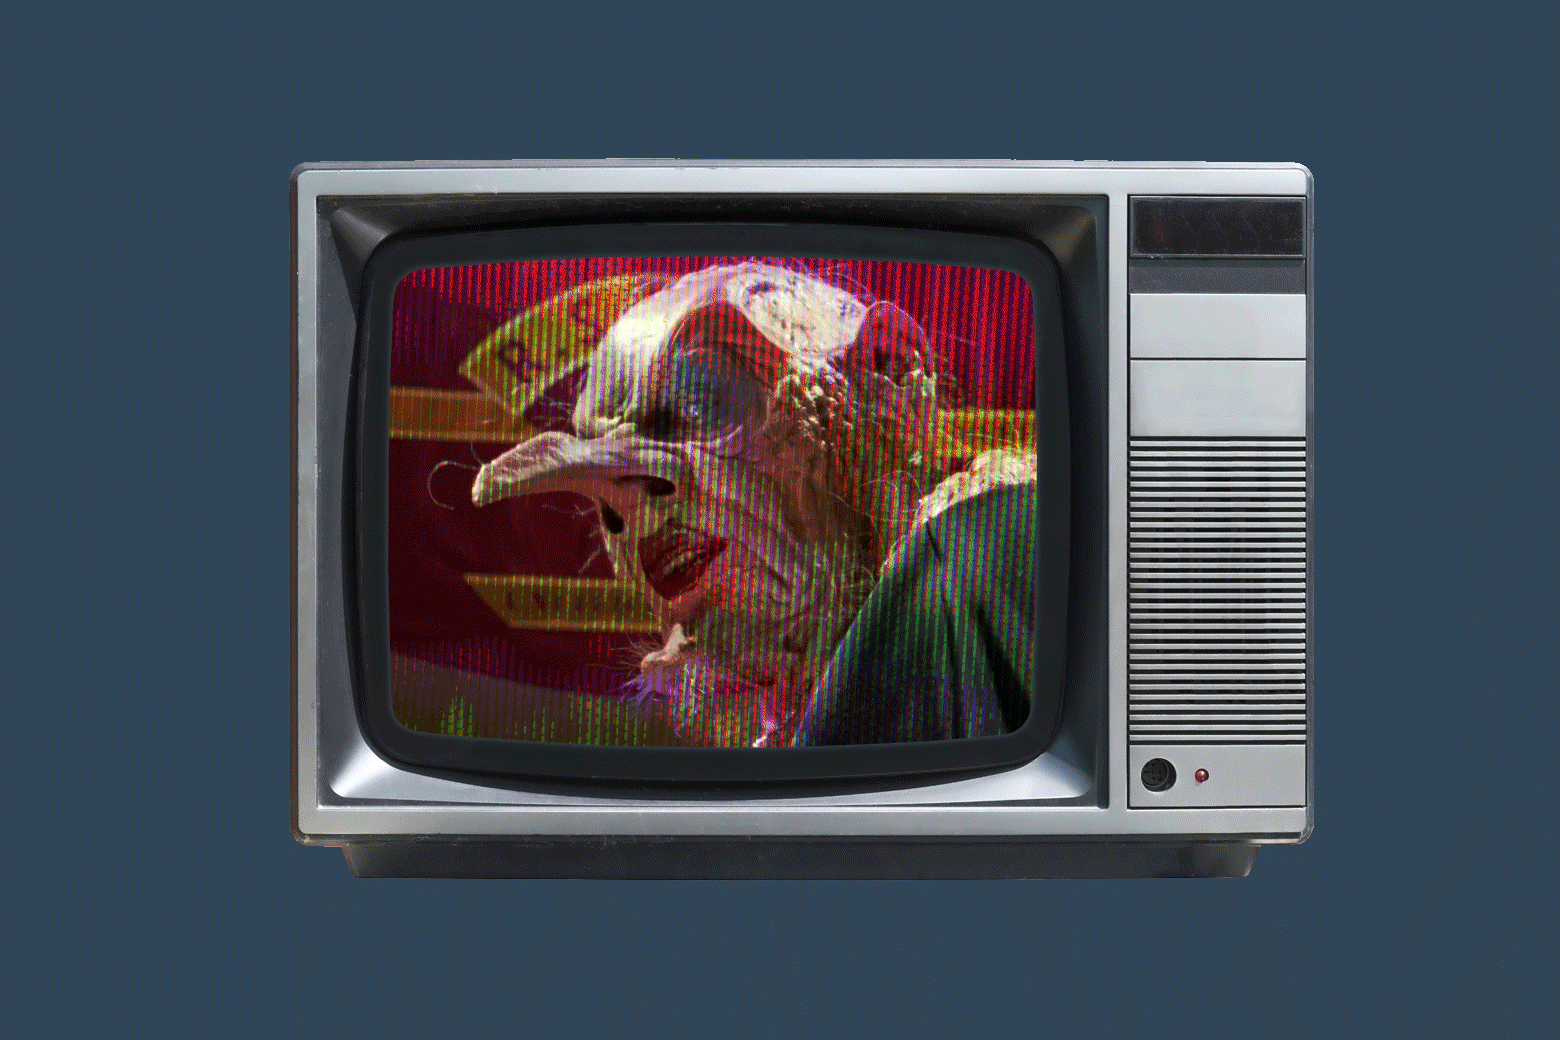 A 1980s-era television with an animated screen that changes from a test pattern to stills from The Witches and Who Framed Roger Rabbit